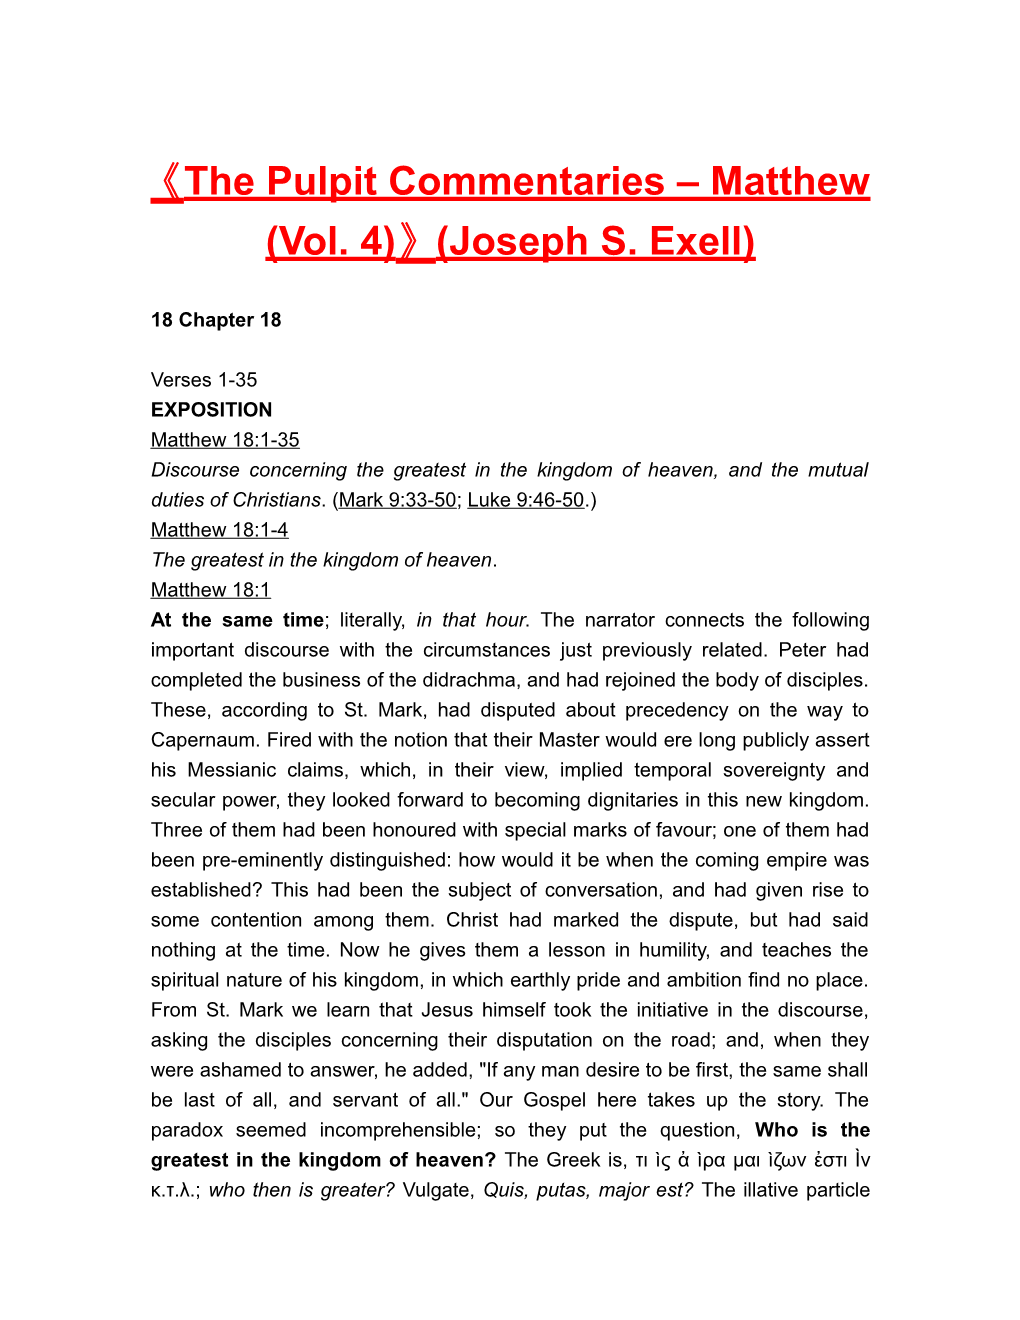 The Pulpit Commentaries Matthew (Vol. 4) (Joseph S. Exell)